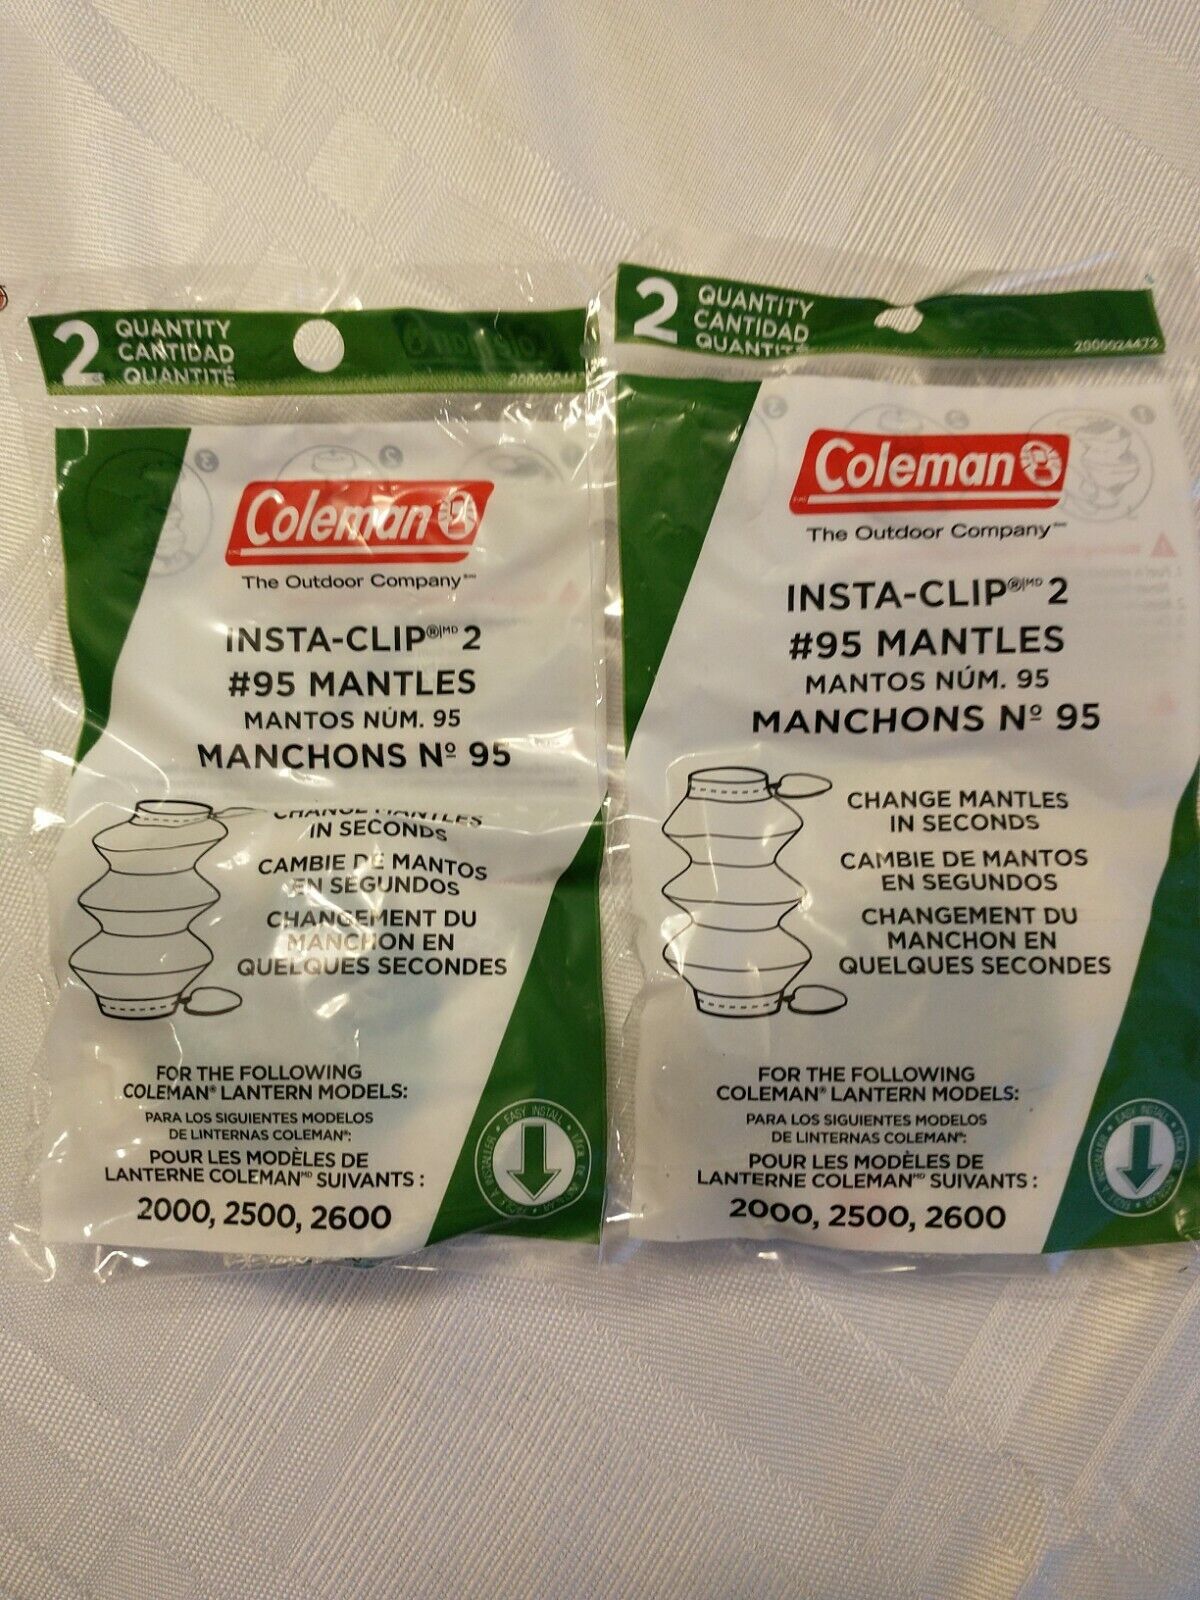 Coleman Insta-clip 2 #95 Mantles Gas Propane Camping Lanterns for sale online